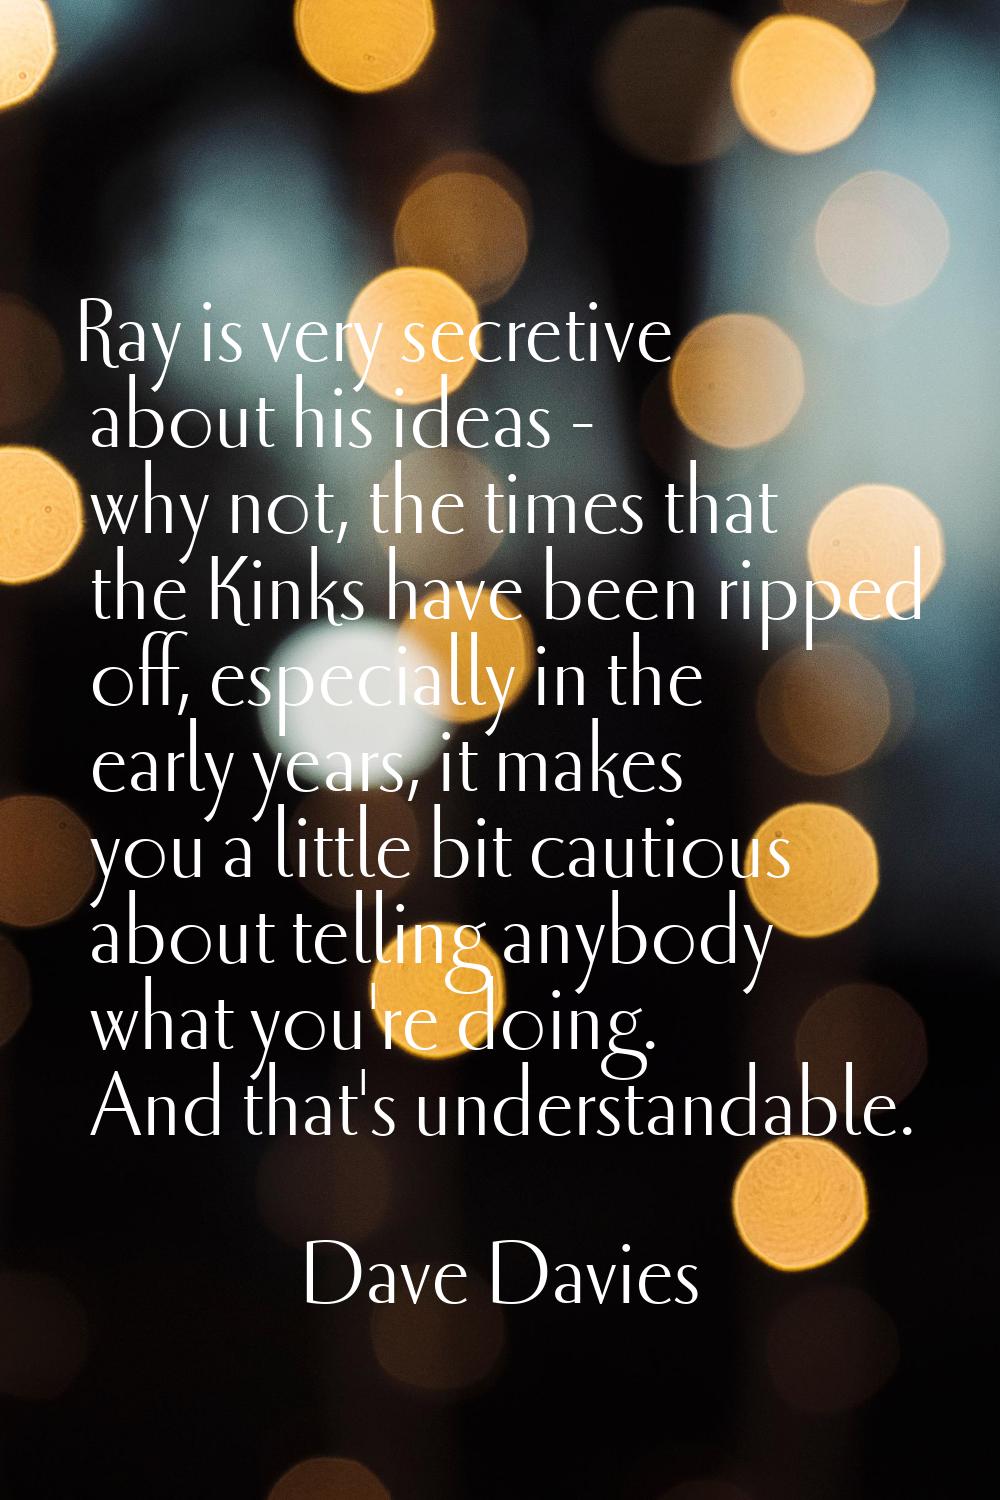 Ray is very secretive about his ideas - why not, the times that the Kinks have been ripped off, esp